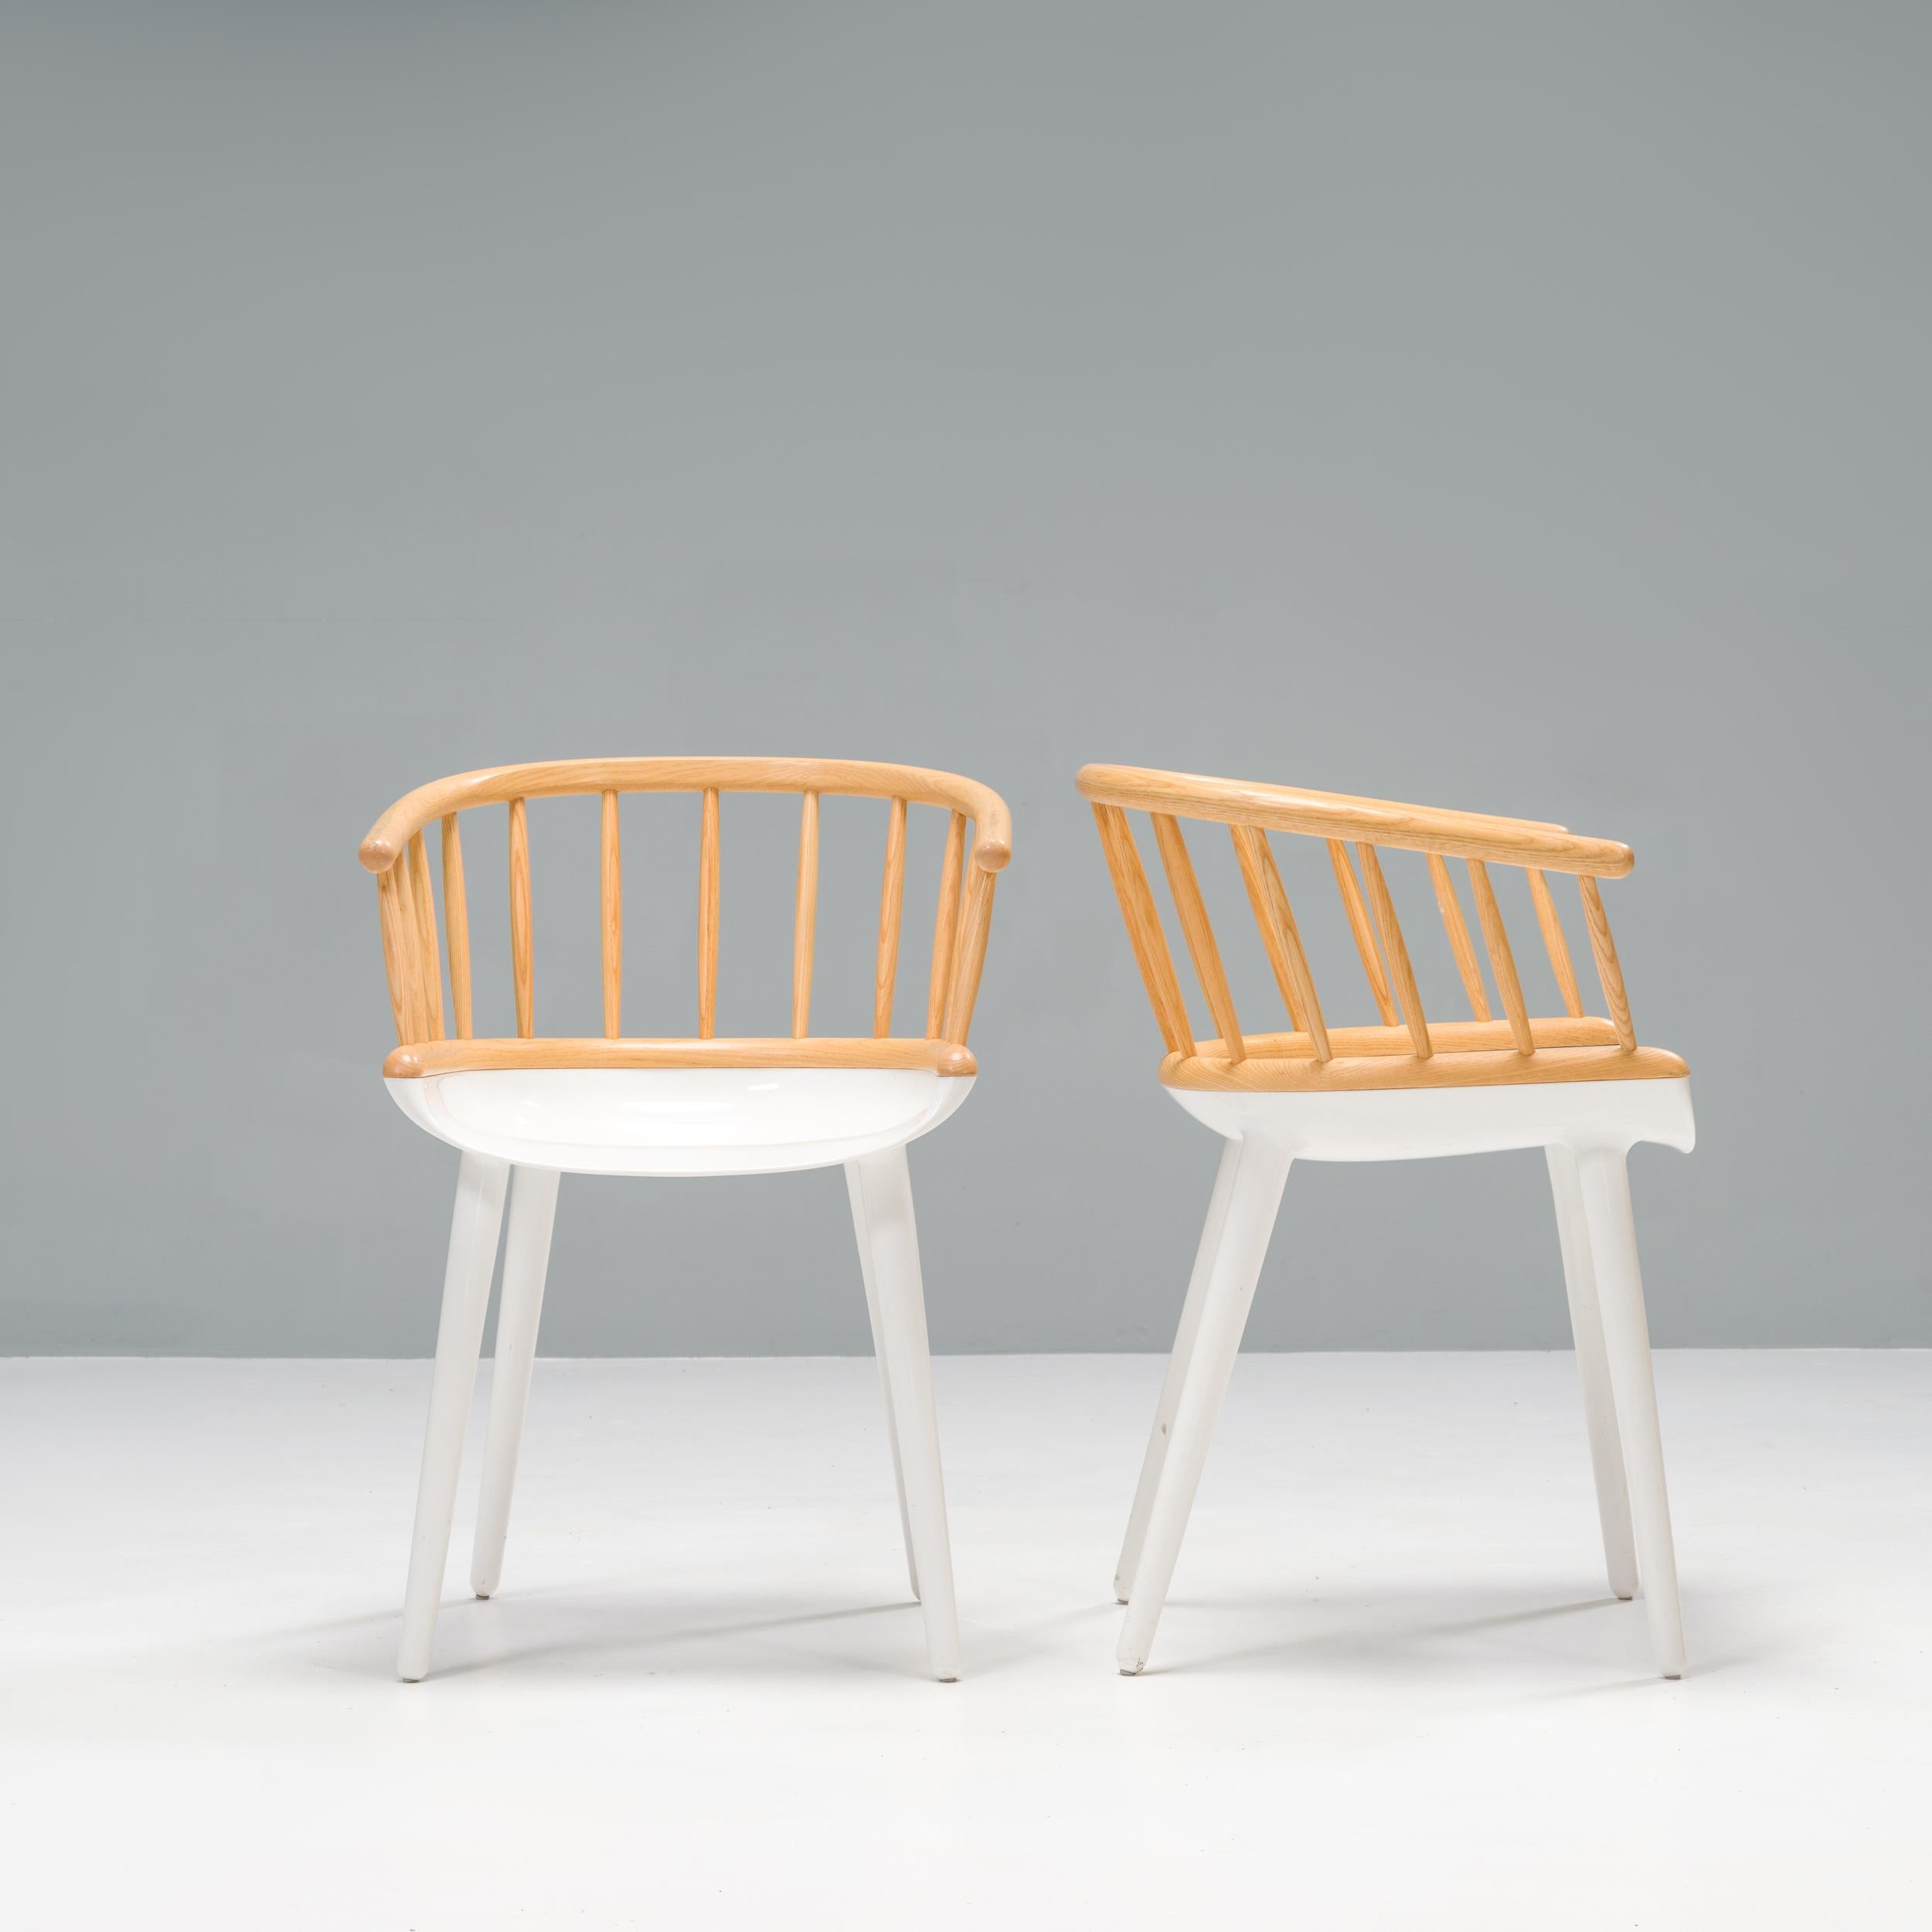 Manufactured by Magis, the Cyborg Stick chairs were originally designed by Marcel Wanders in 2012.
 
A chair of two halves, it is constructed from contrasting materials with the frame made from a glossy white air-moulded polycarbonate with the